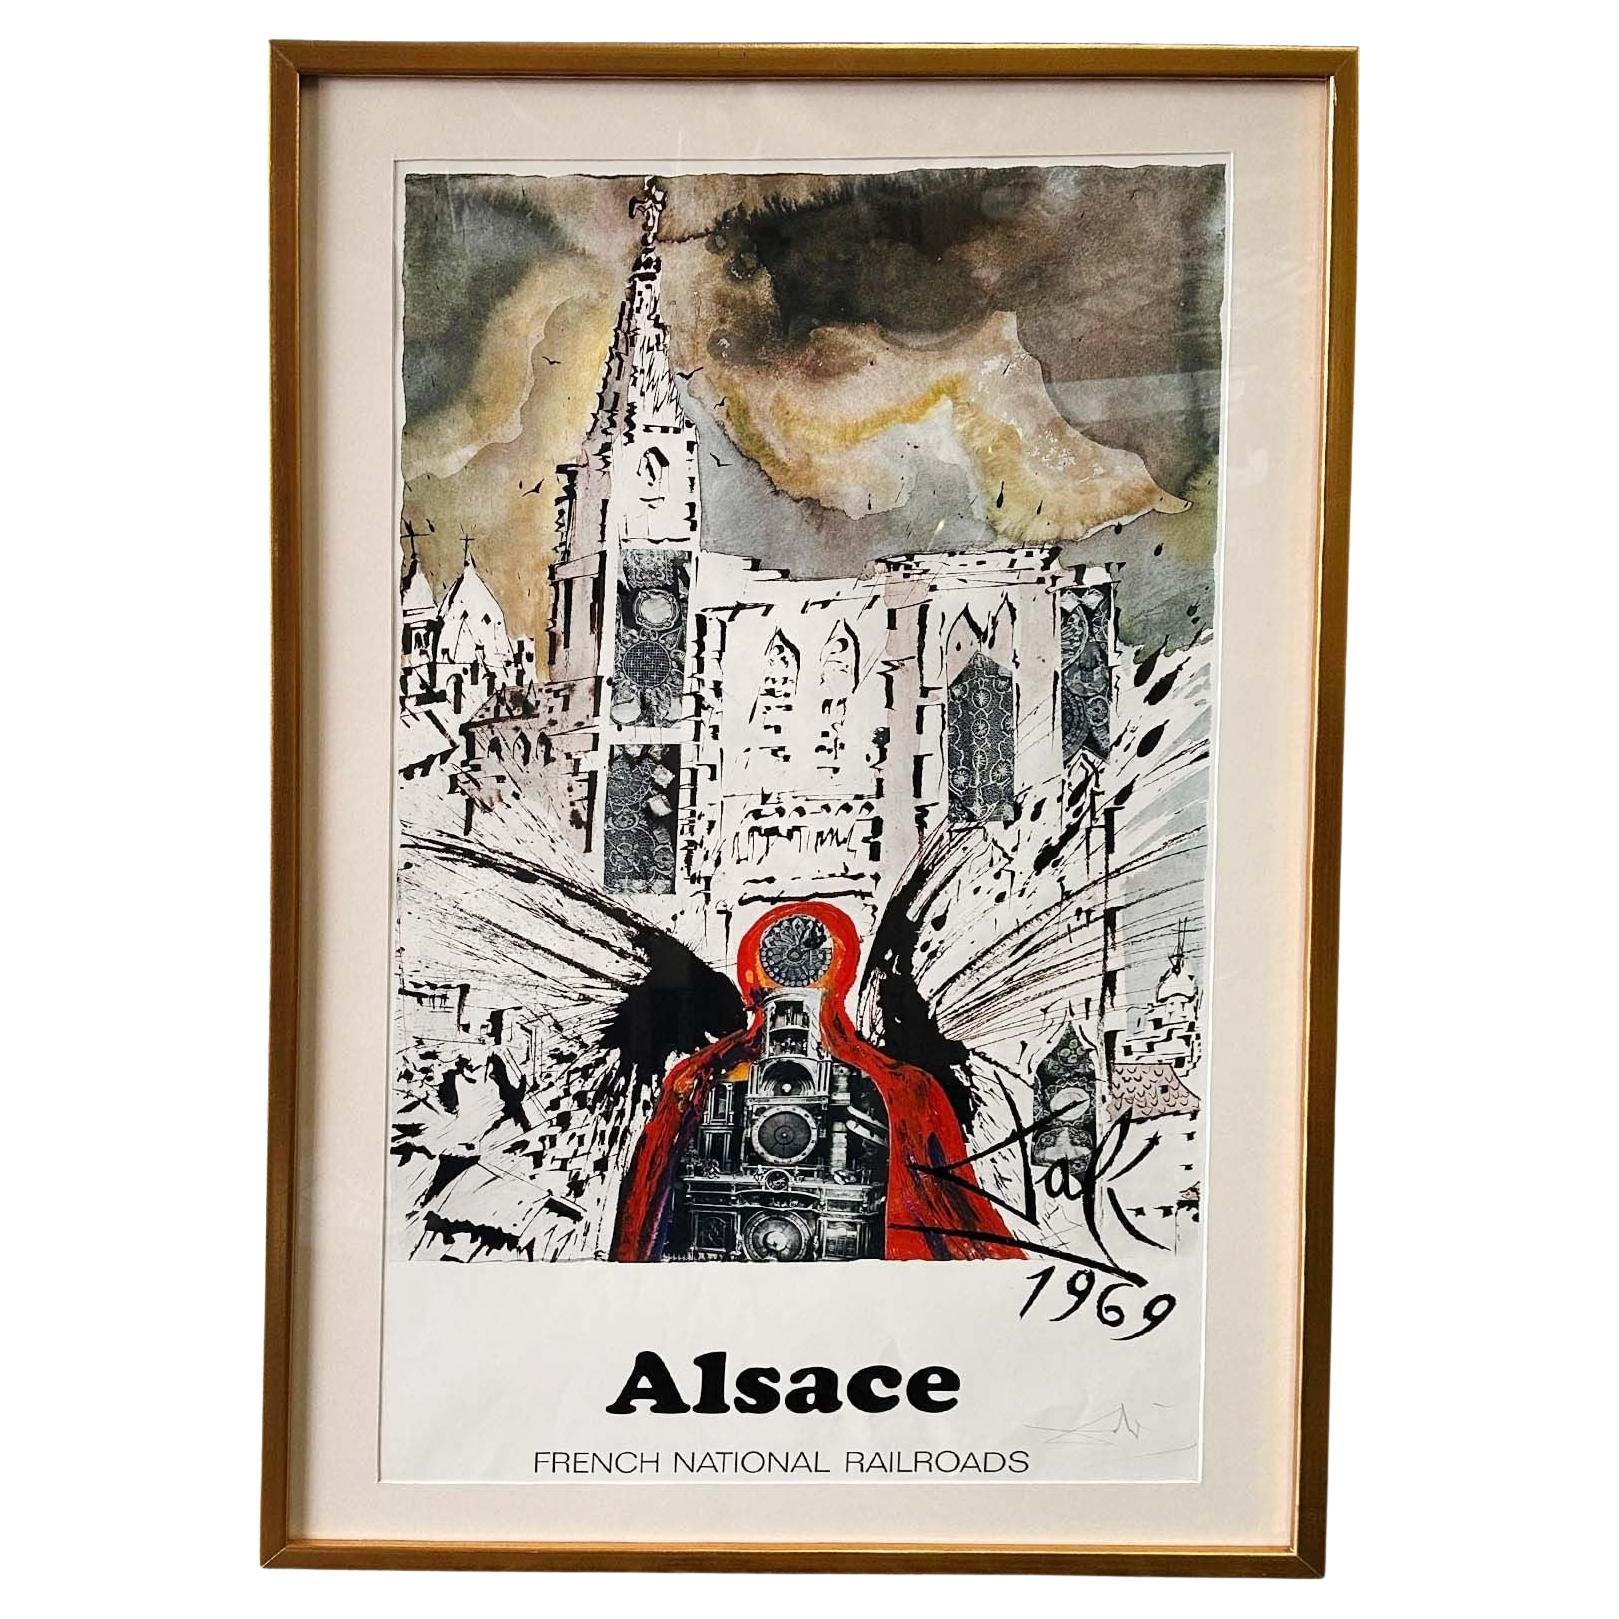 Abstract "Alsace" Lithograph Poster by Salvador Dalí, 1969 For Sale